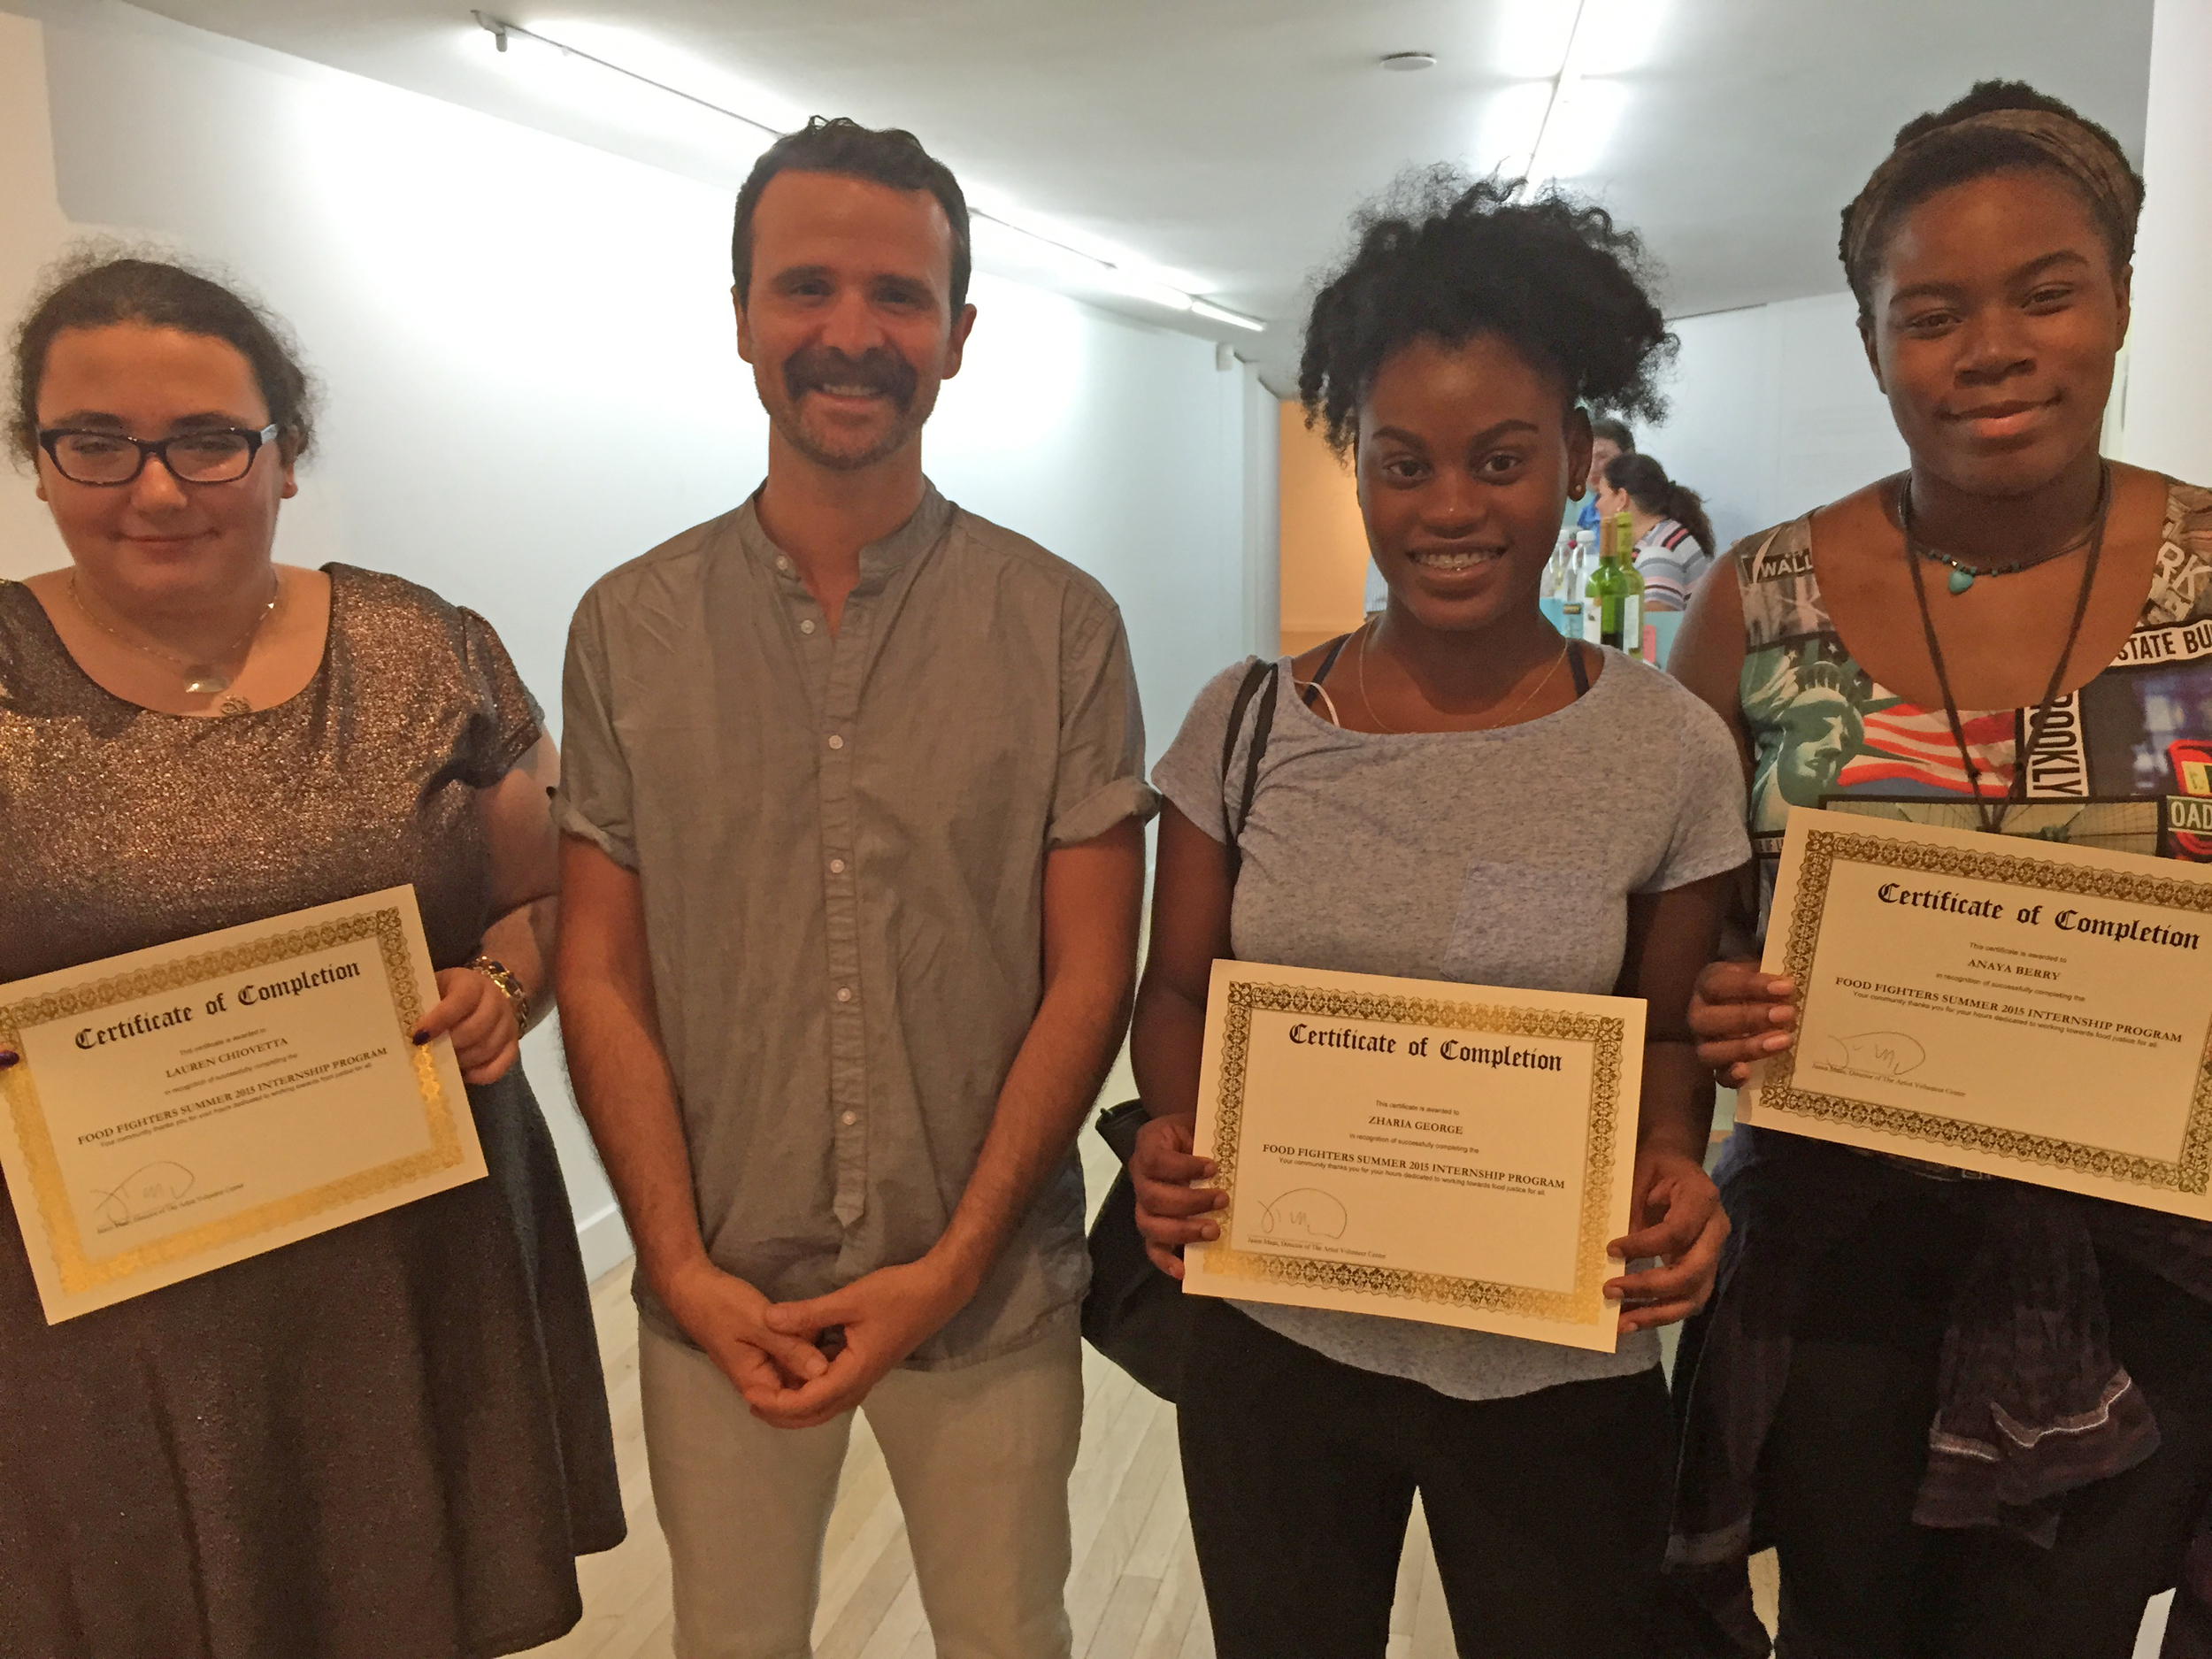  It's official! FOOD FIGHTERS pose with their certificates along with AVC Founder &amp; Director Jason Maas 